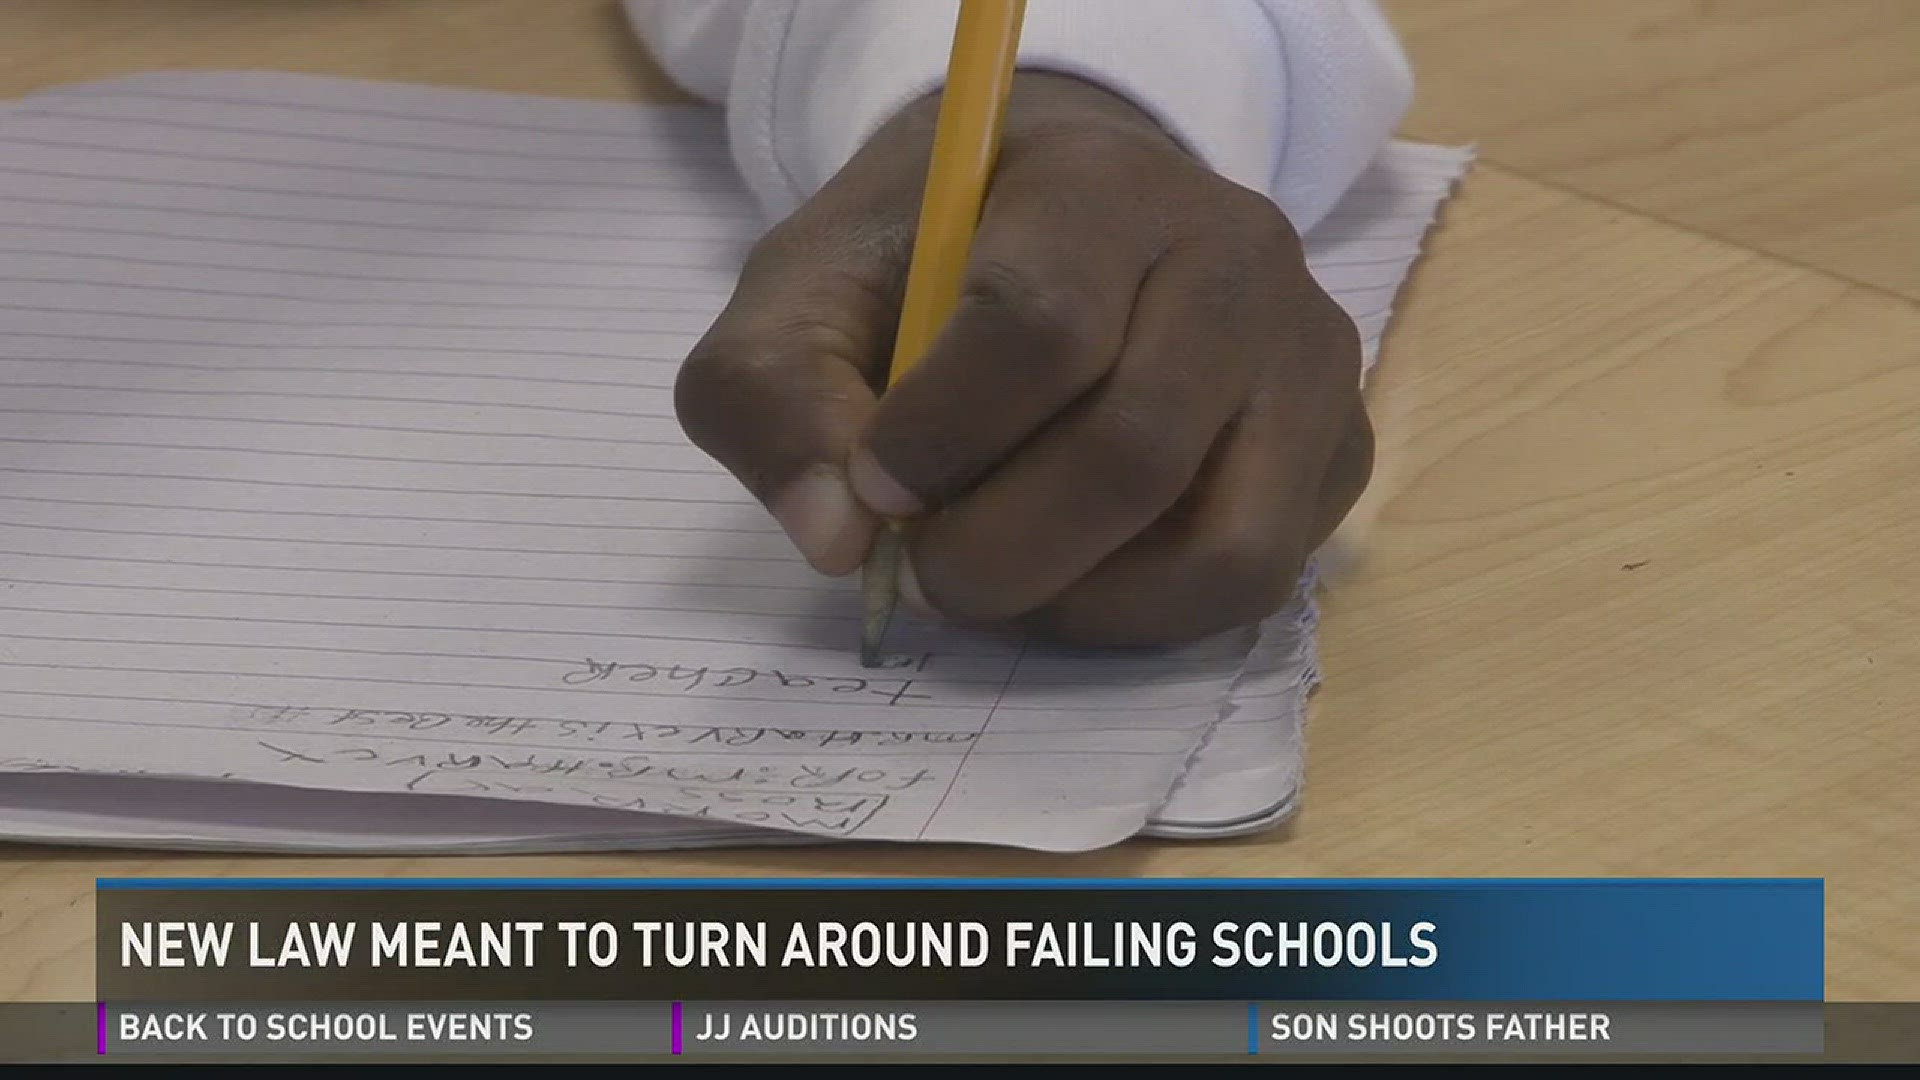 New law meant to turn around failing schools